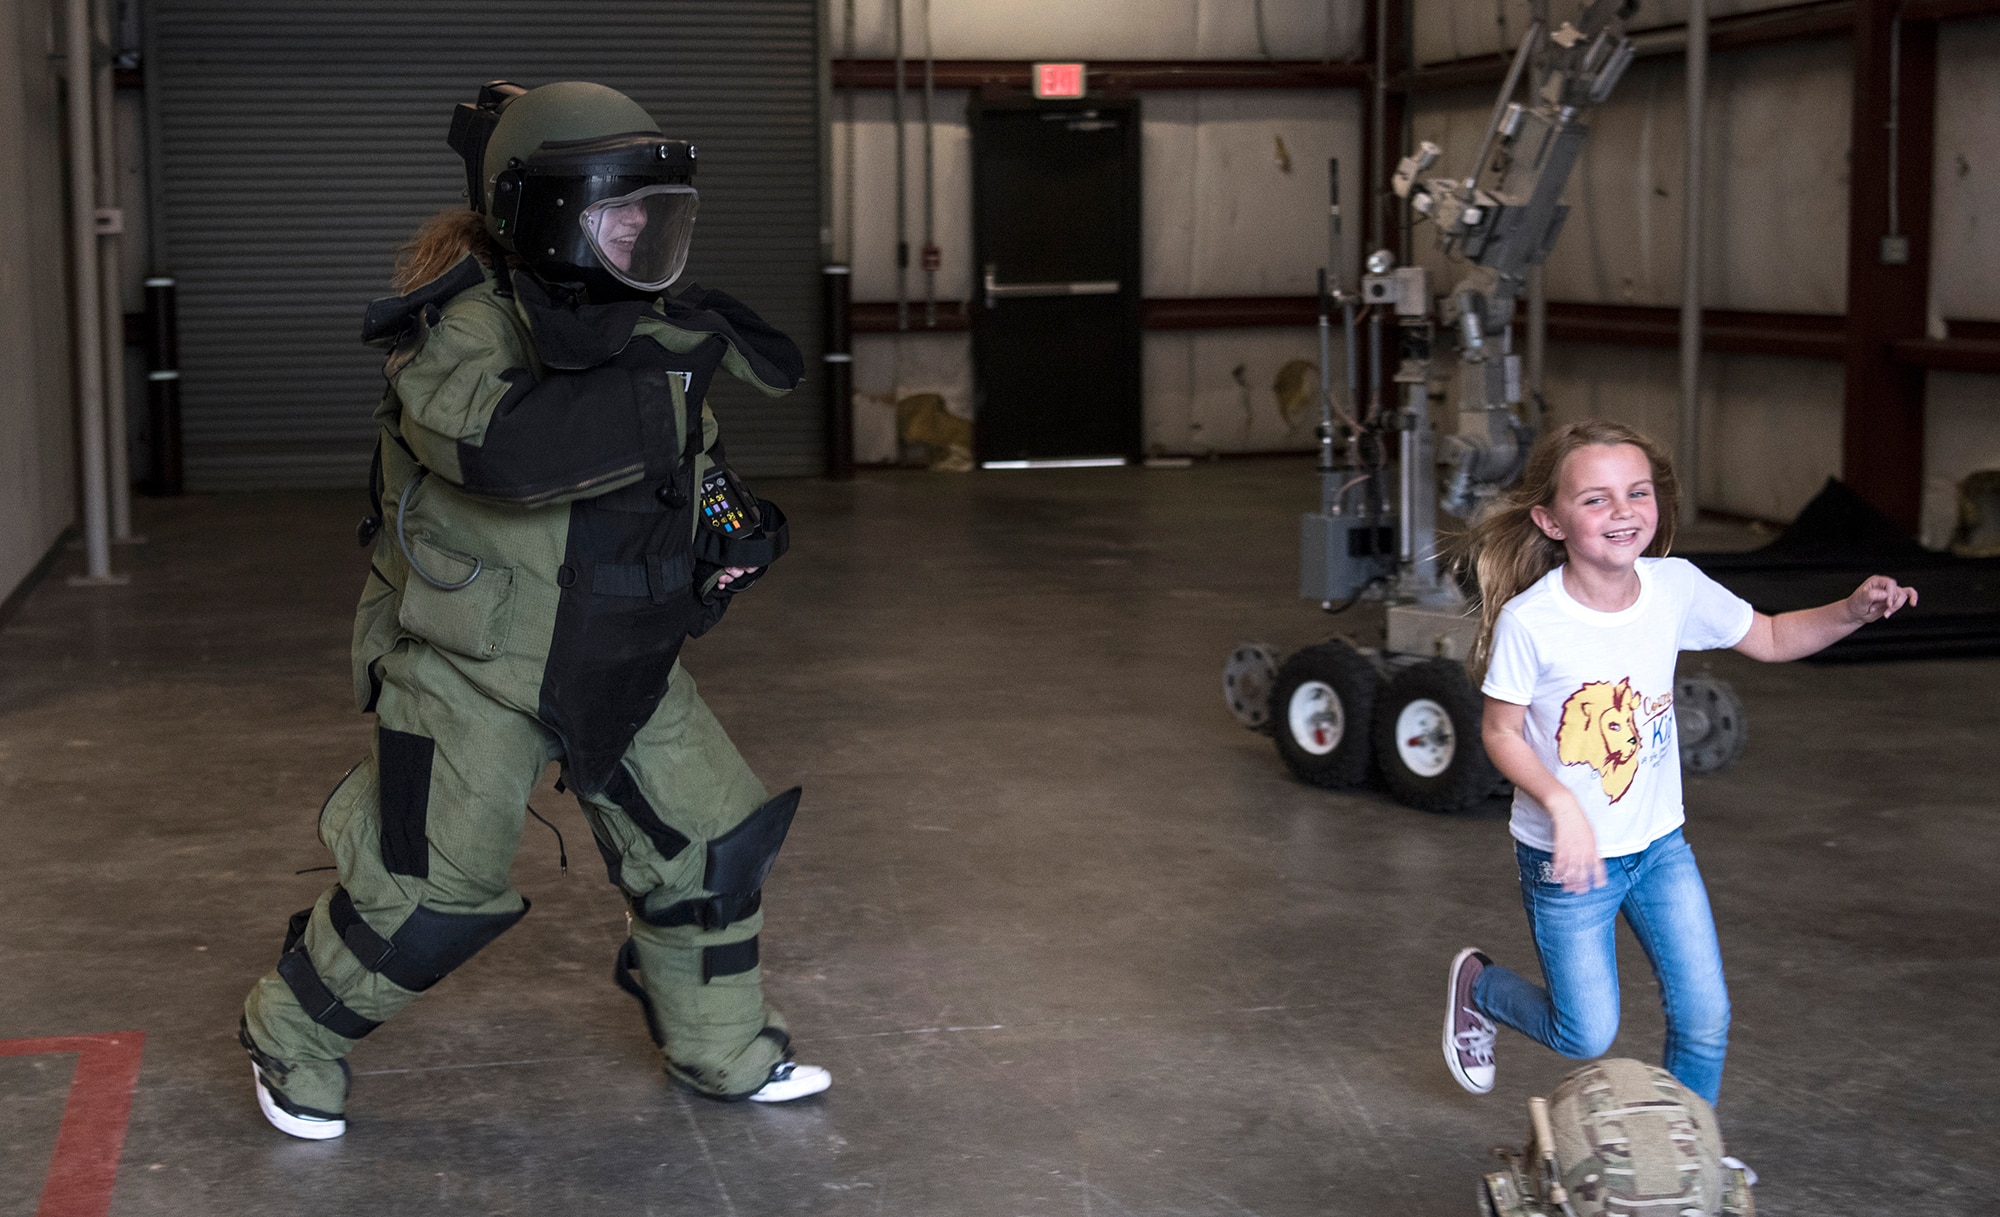 Fallon Emery, a new honorary member of the 437th Operations Support Squadron, chases her sister Mae while wearing an explosive ordnance disposal protective suit Nov. 7, 2018, at Joint Base Charleston, S.C., as part of the Airman for a Day program.